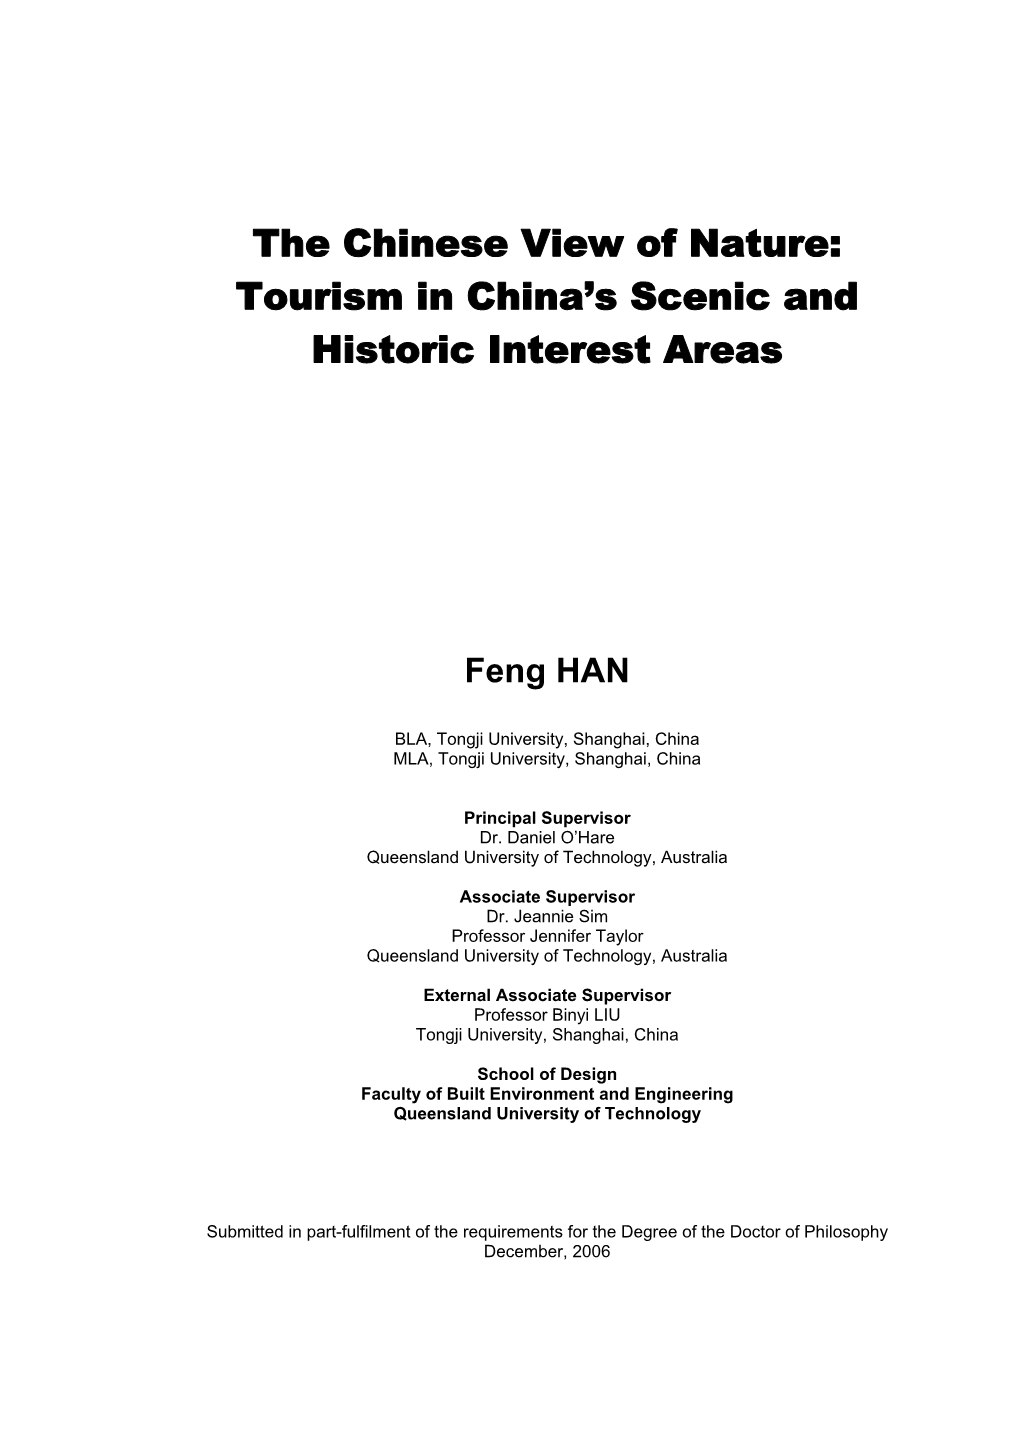 The Chinese View of Nature: Tourism in China’S Scenic and Historic Interest Areas